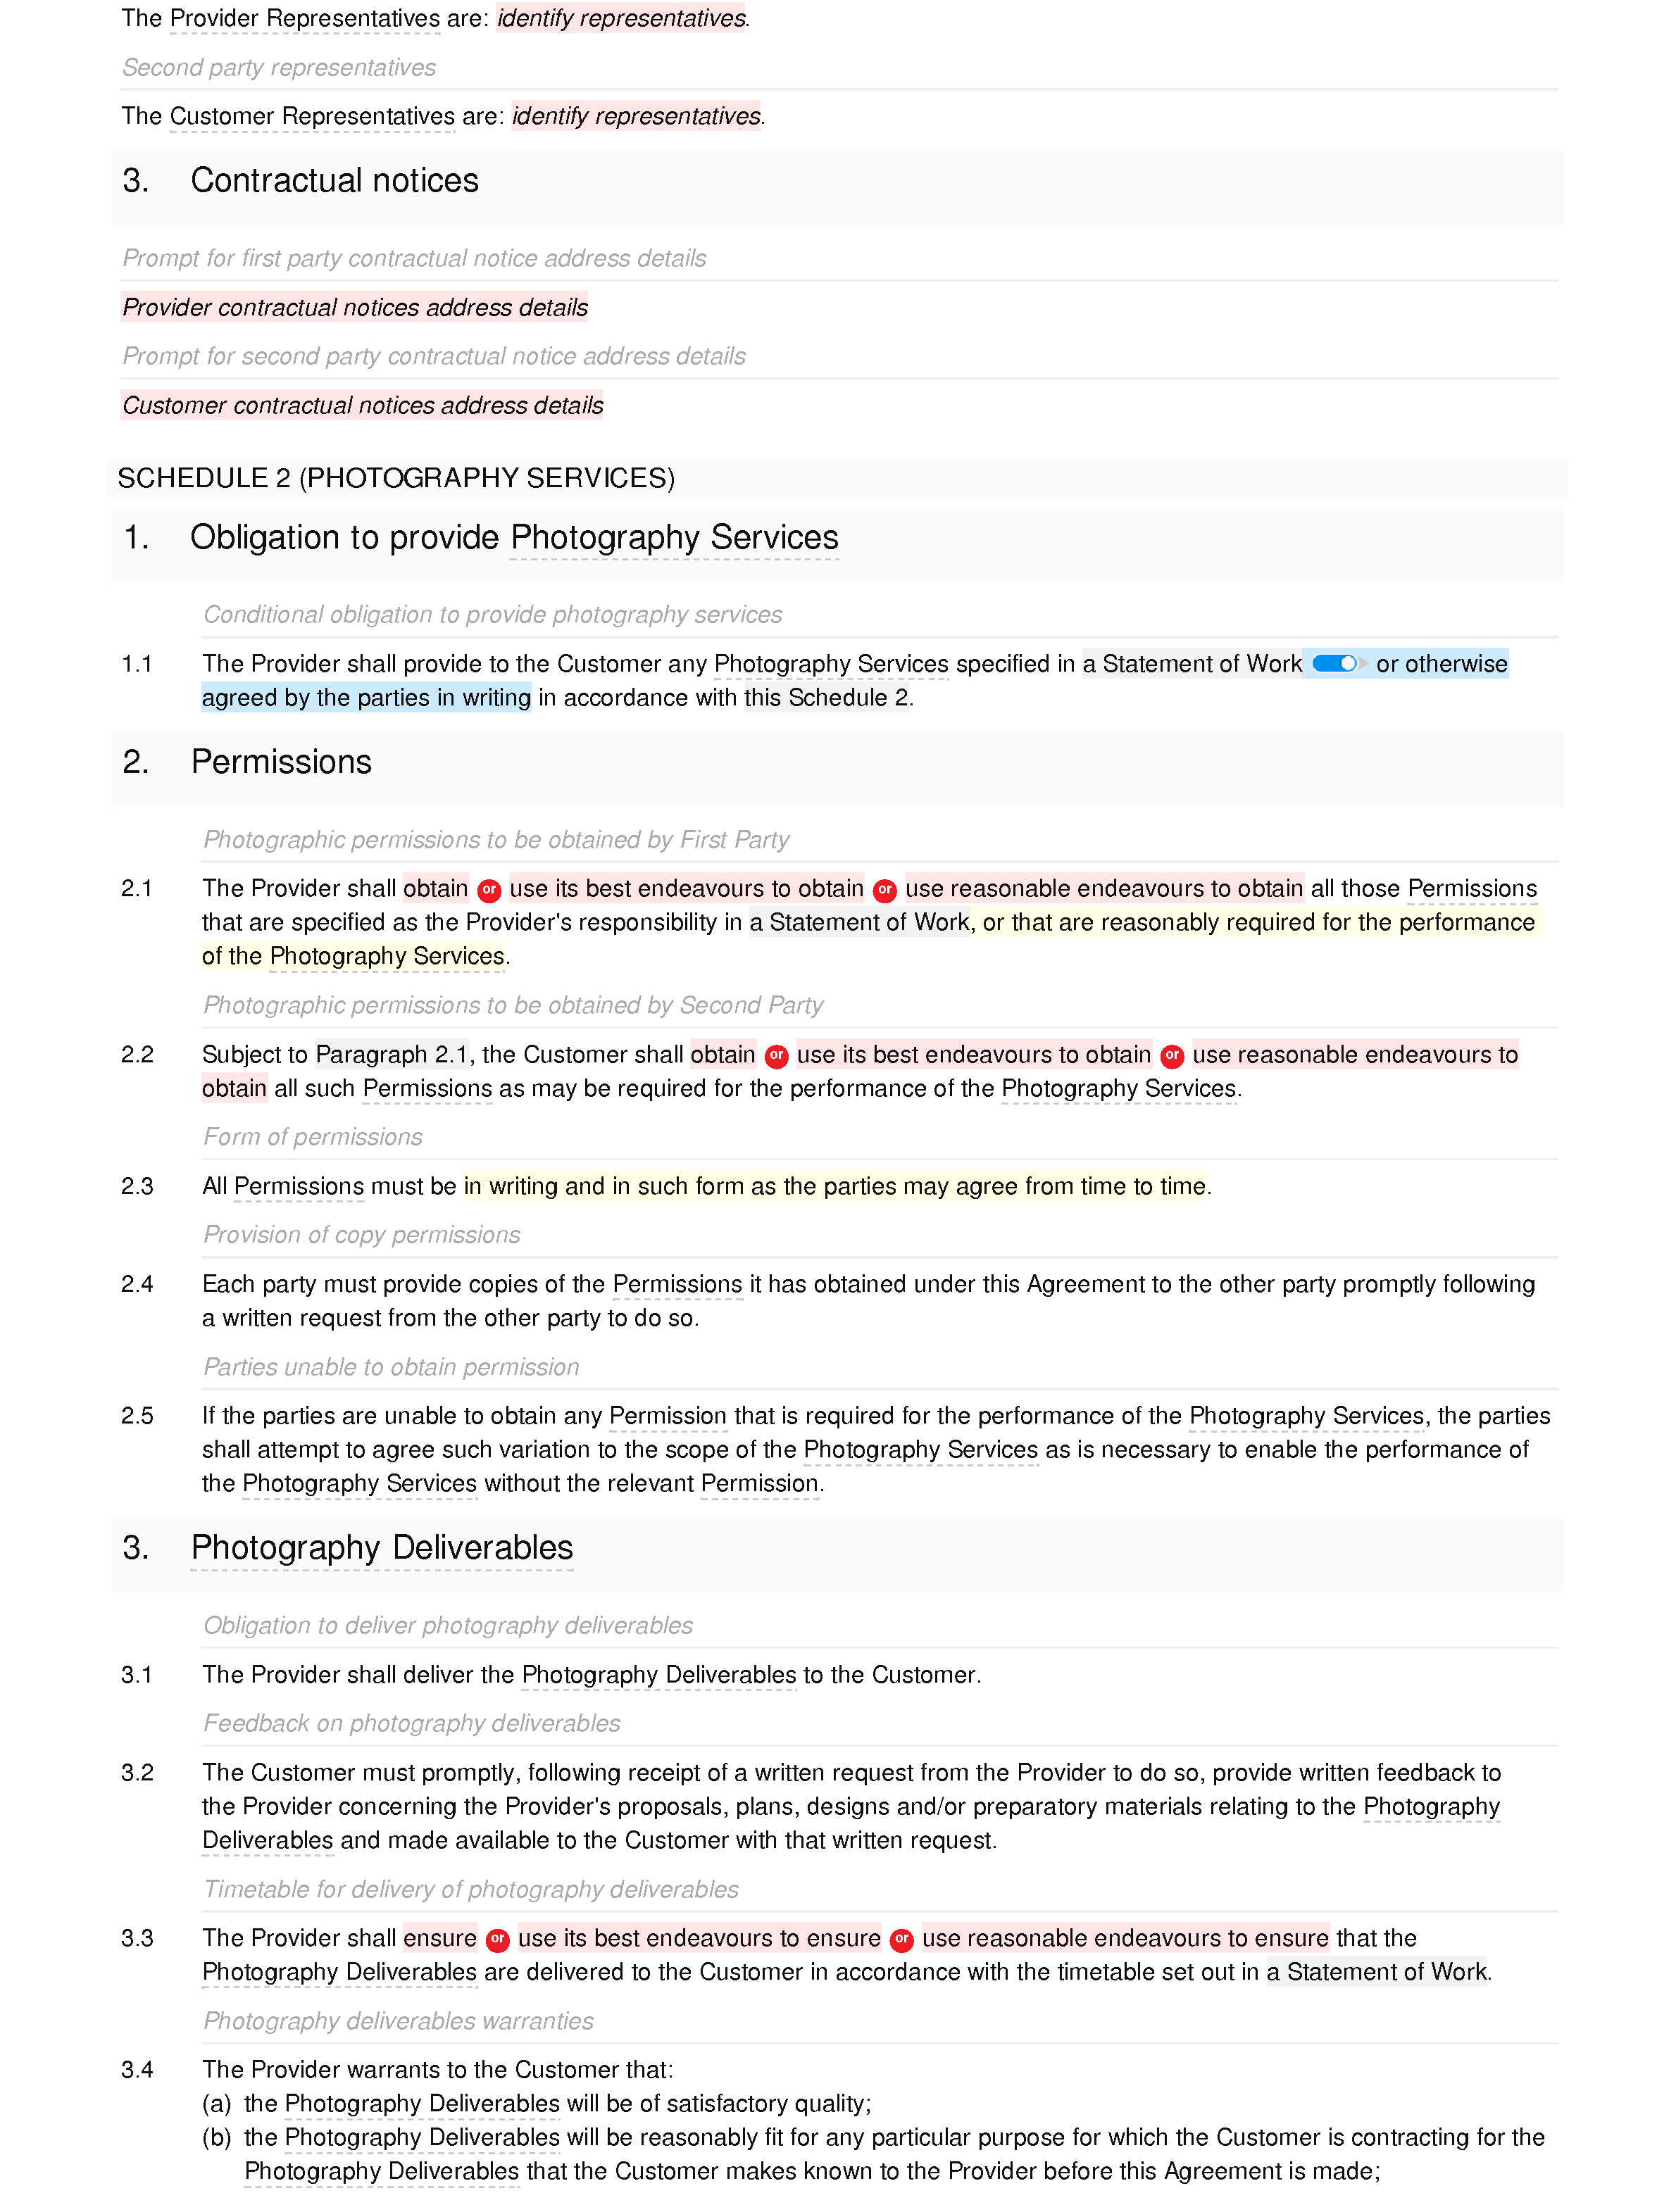 Web services and photography agreement document editor preview